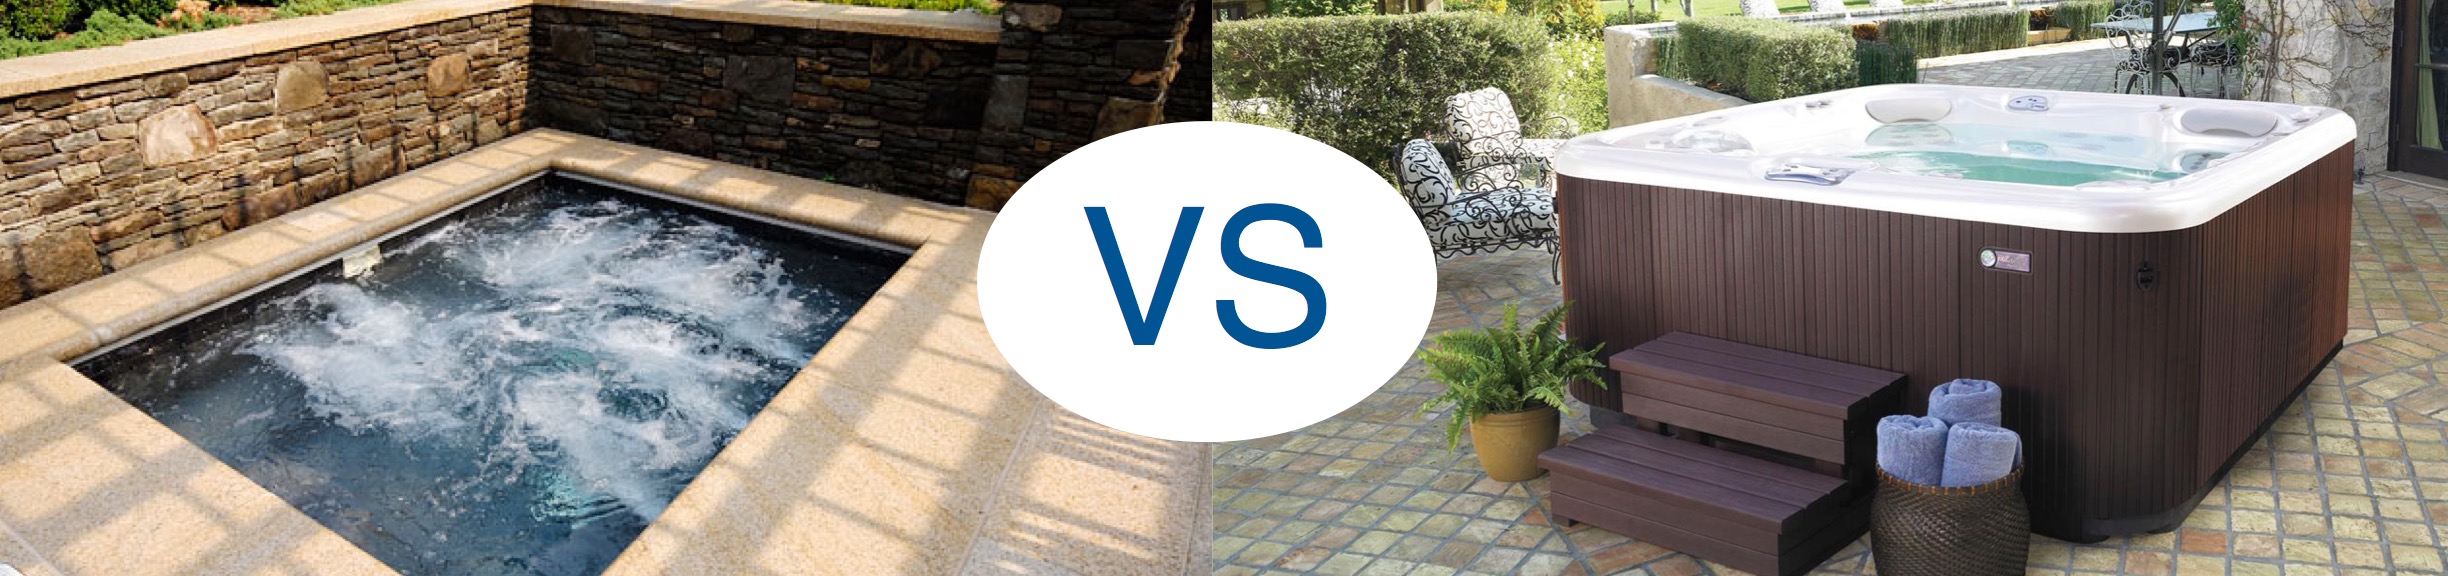 In-Ground Spa vs. Above-Ground Hot Tub